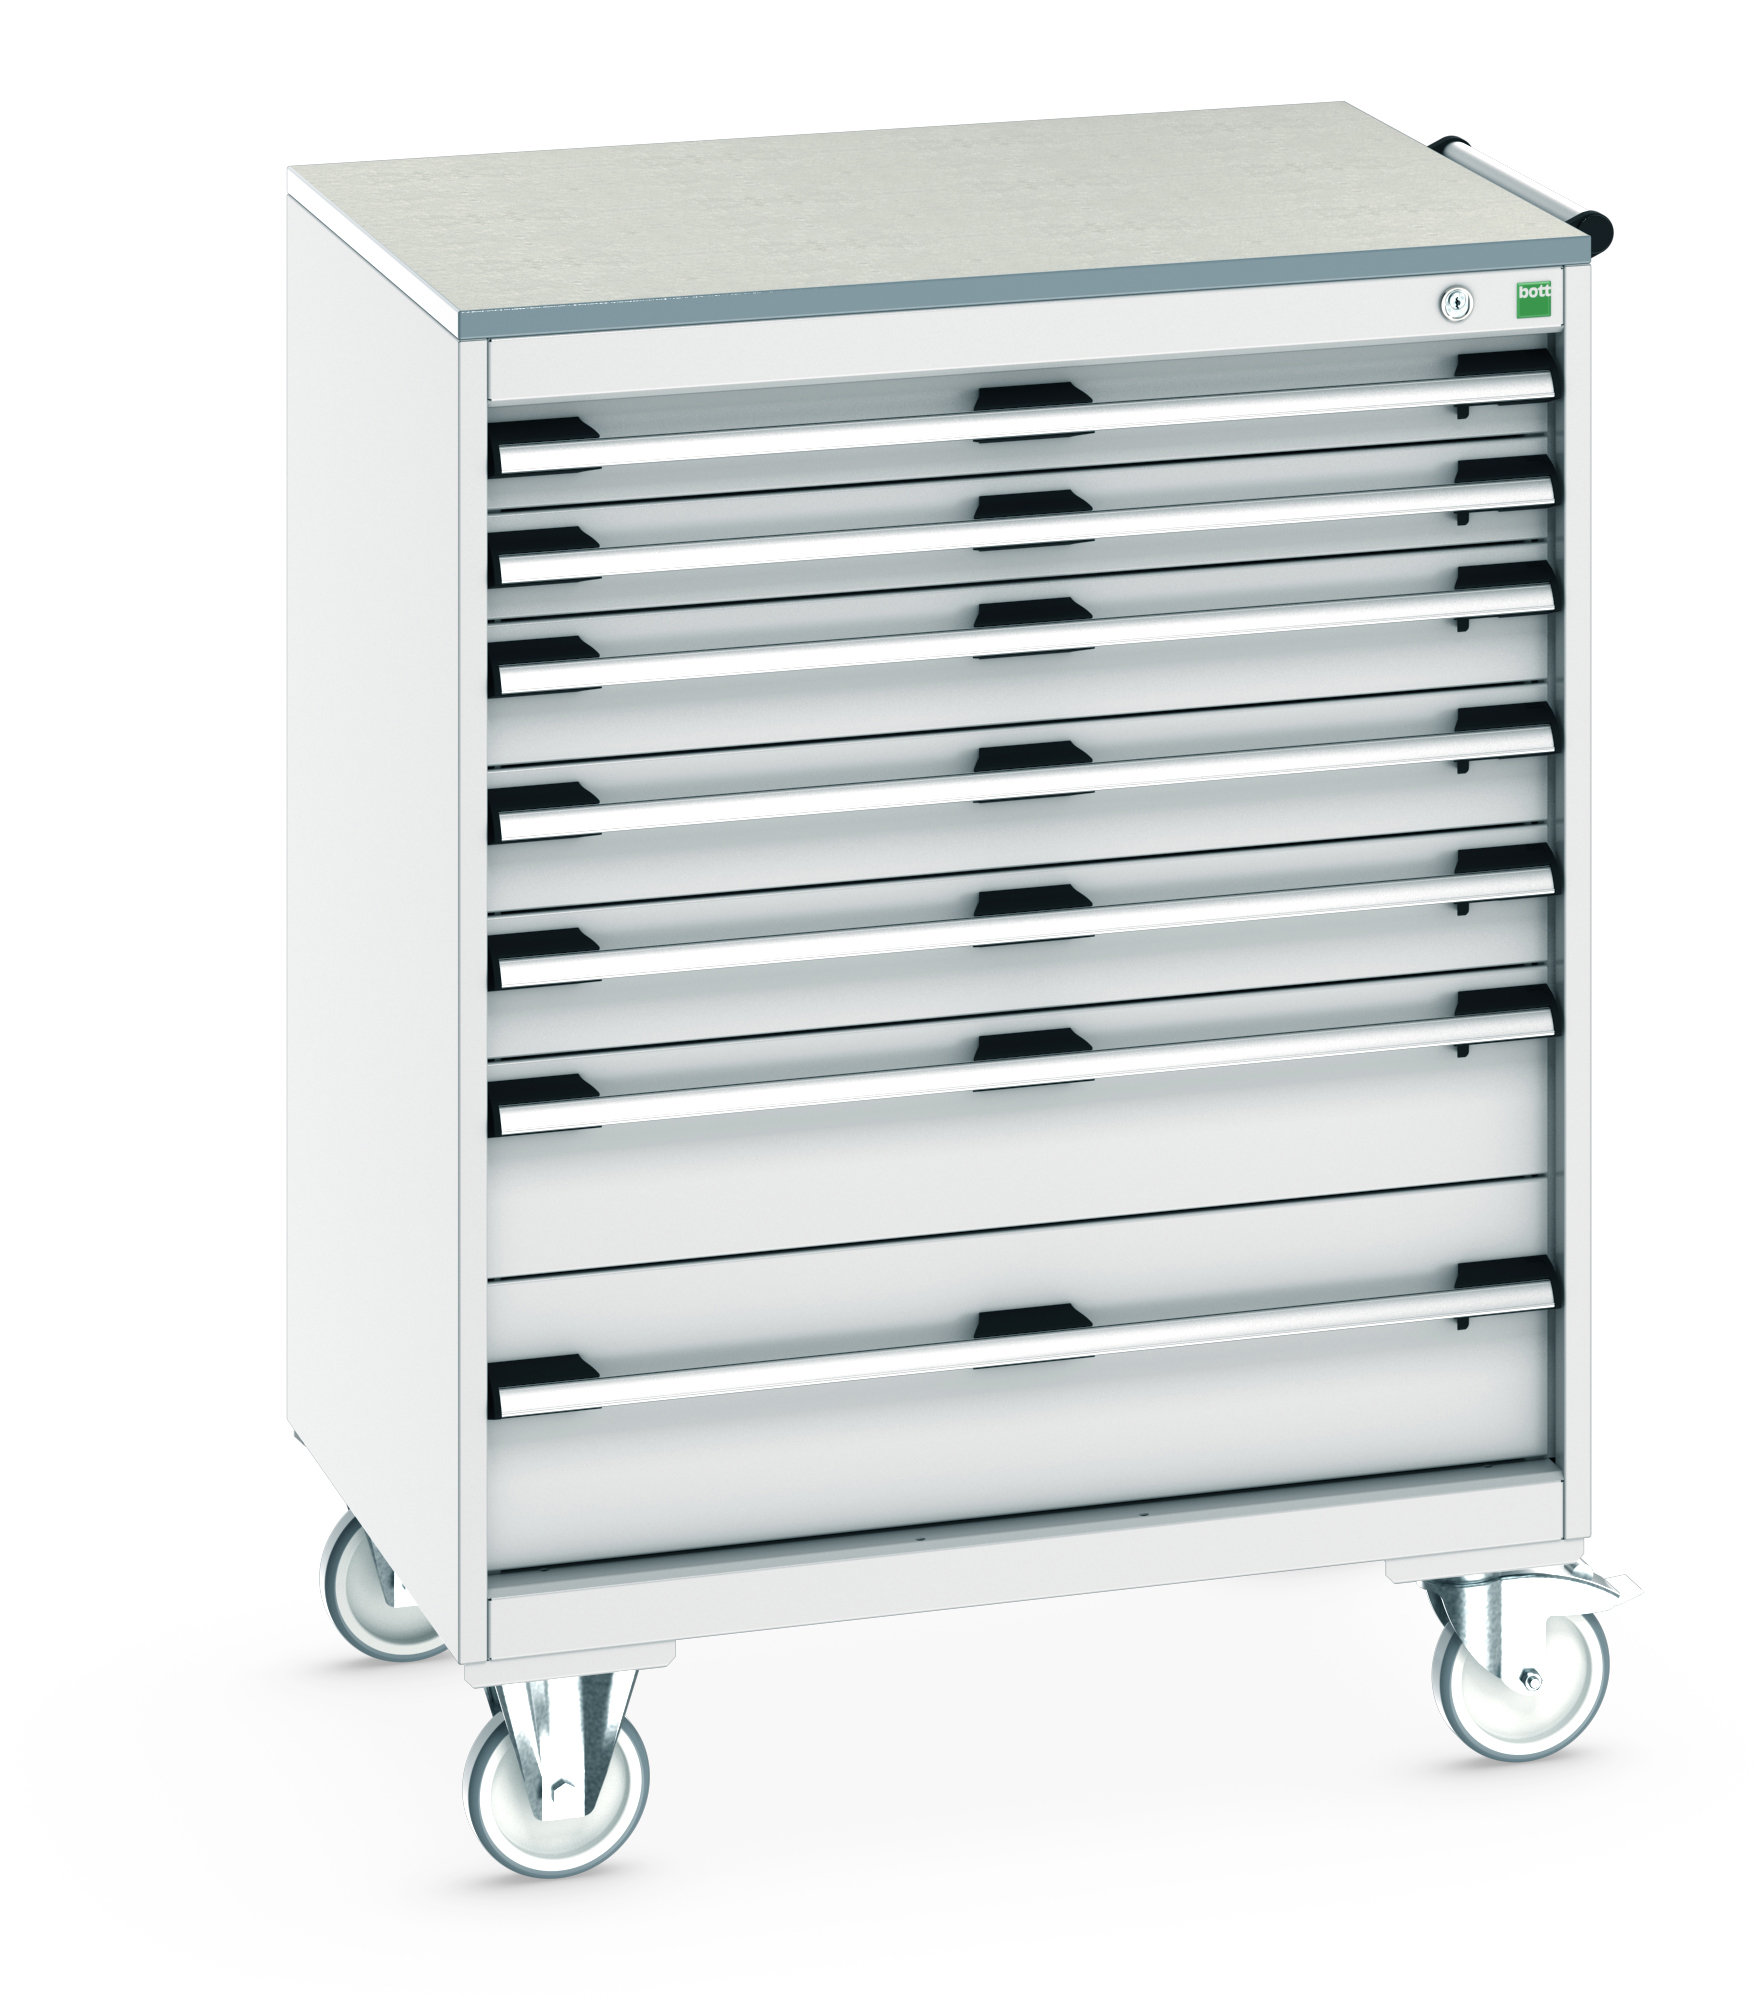 Bott Cubio Mobile Drawer Cabinet With 7 Drawers & Lino Worktop - 40402162.16V